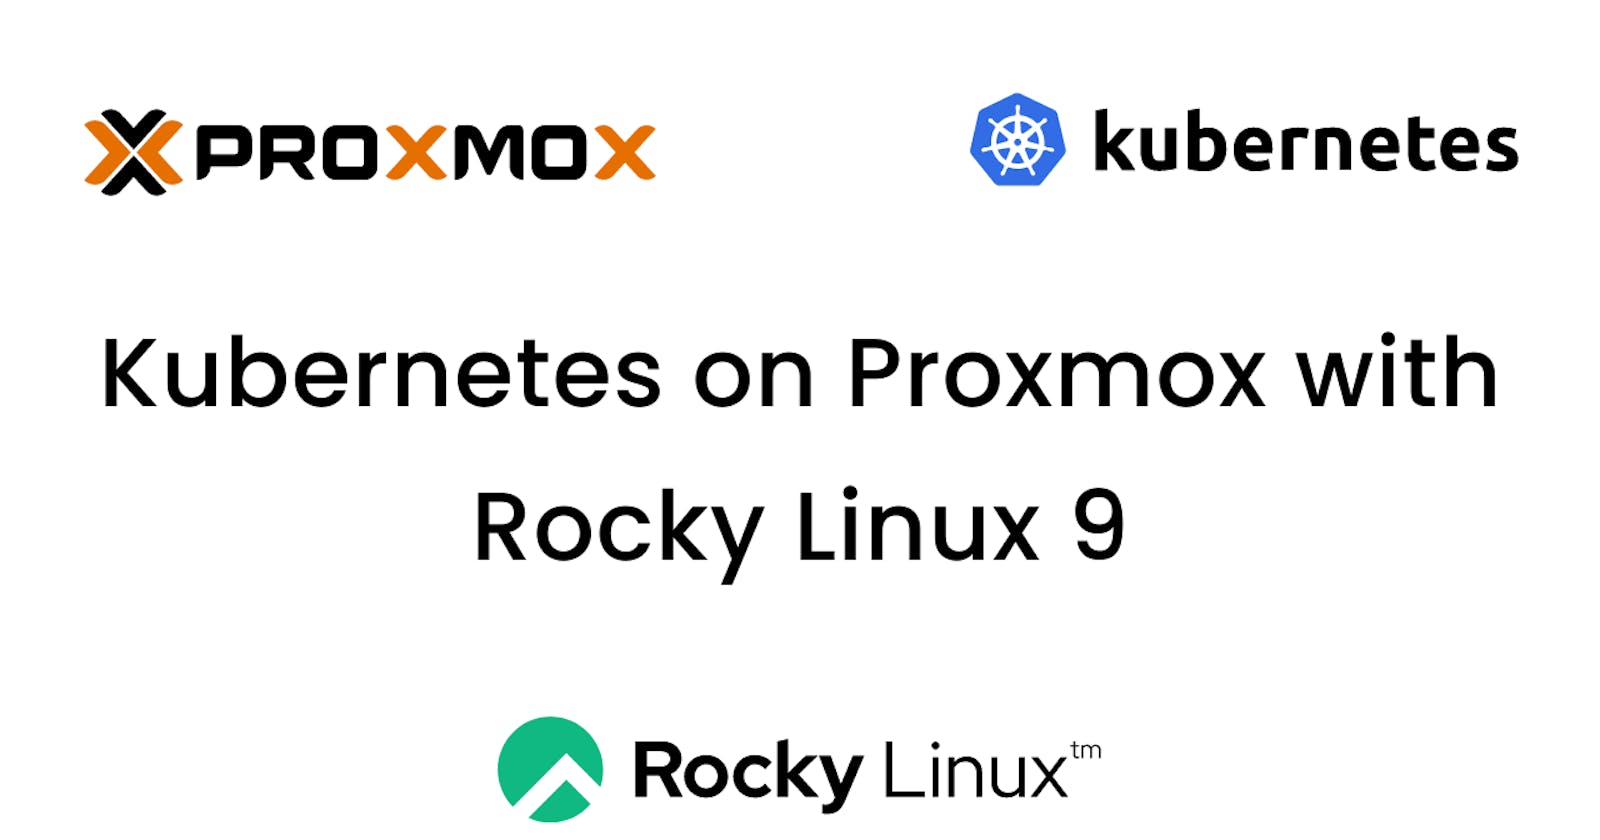 How to setup a Kubernetes cluster with Rocky Linux 9 using Proxmox VE on your old laptop?